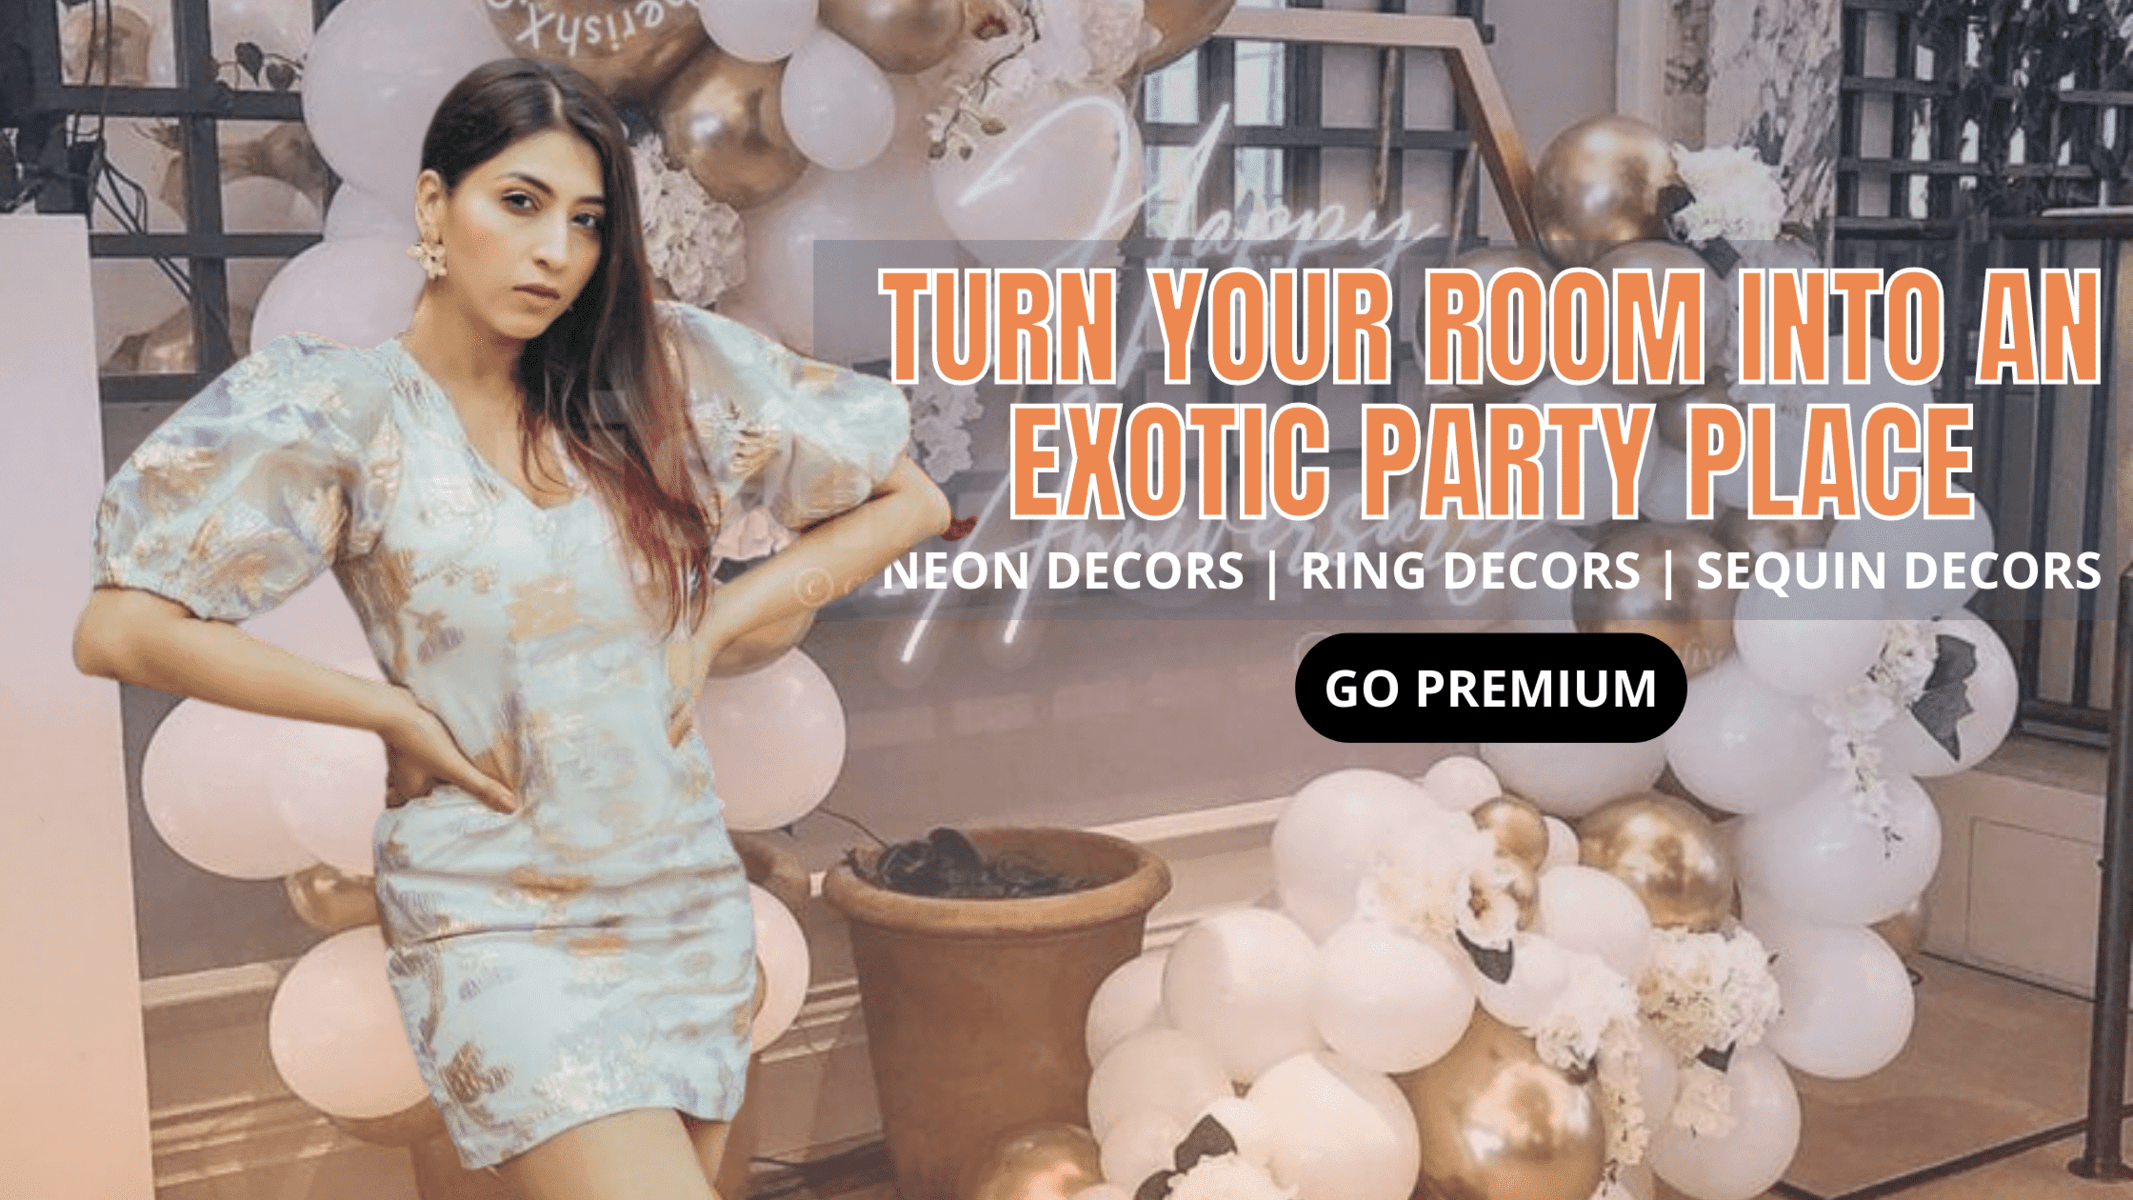 Turn your Room into an Exotic Party Place with these Premium Neon Decors, Ring Decors, and Sequin Decors